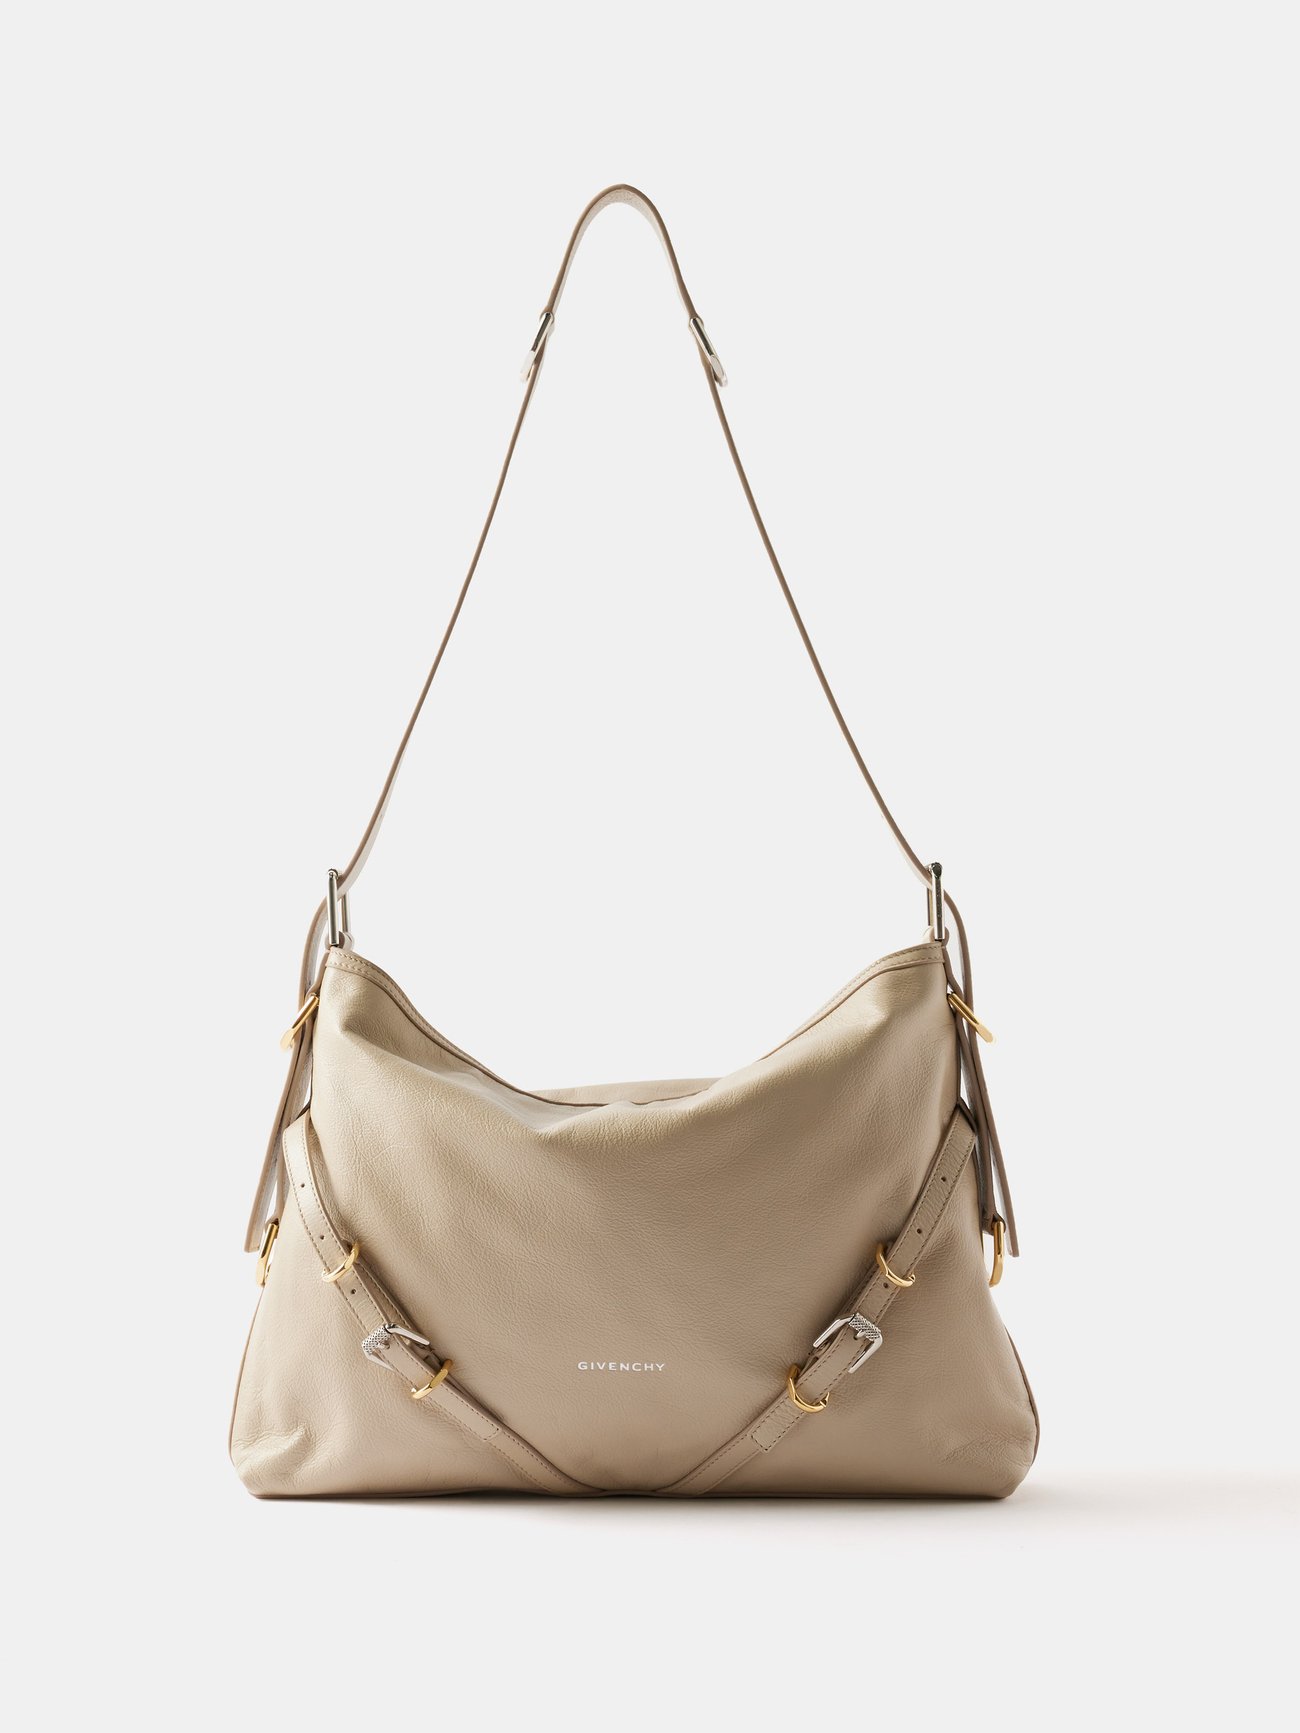 Popular Women's Bags From Givenchy